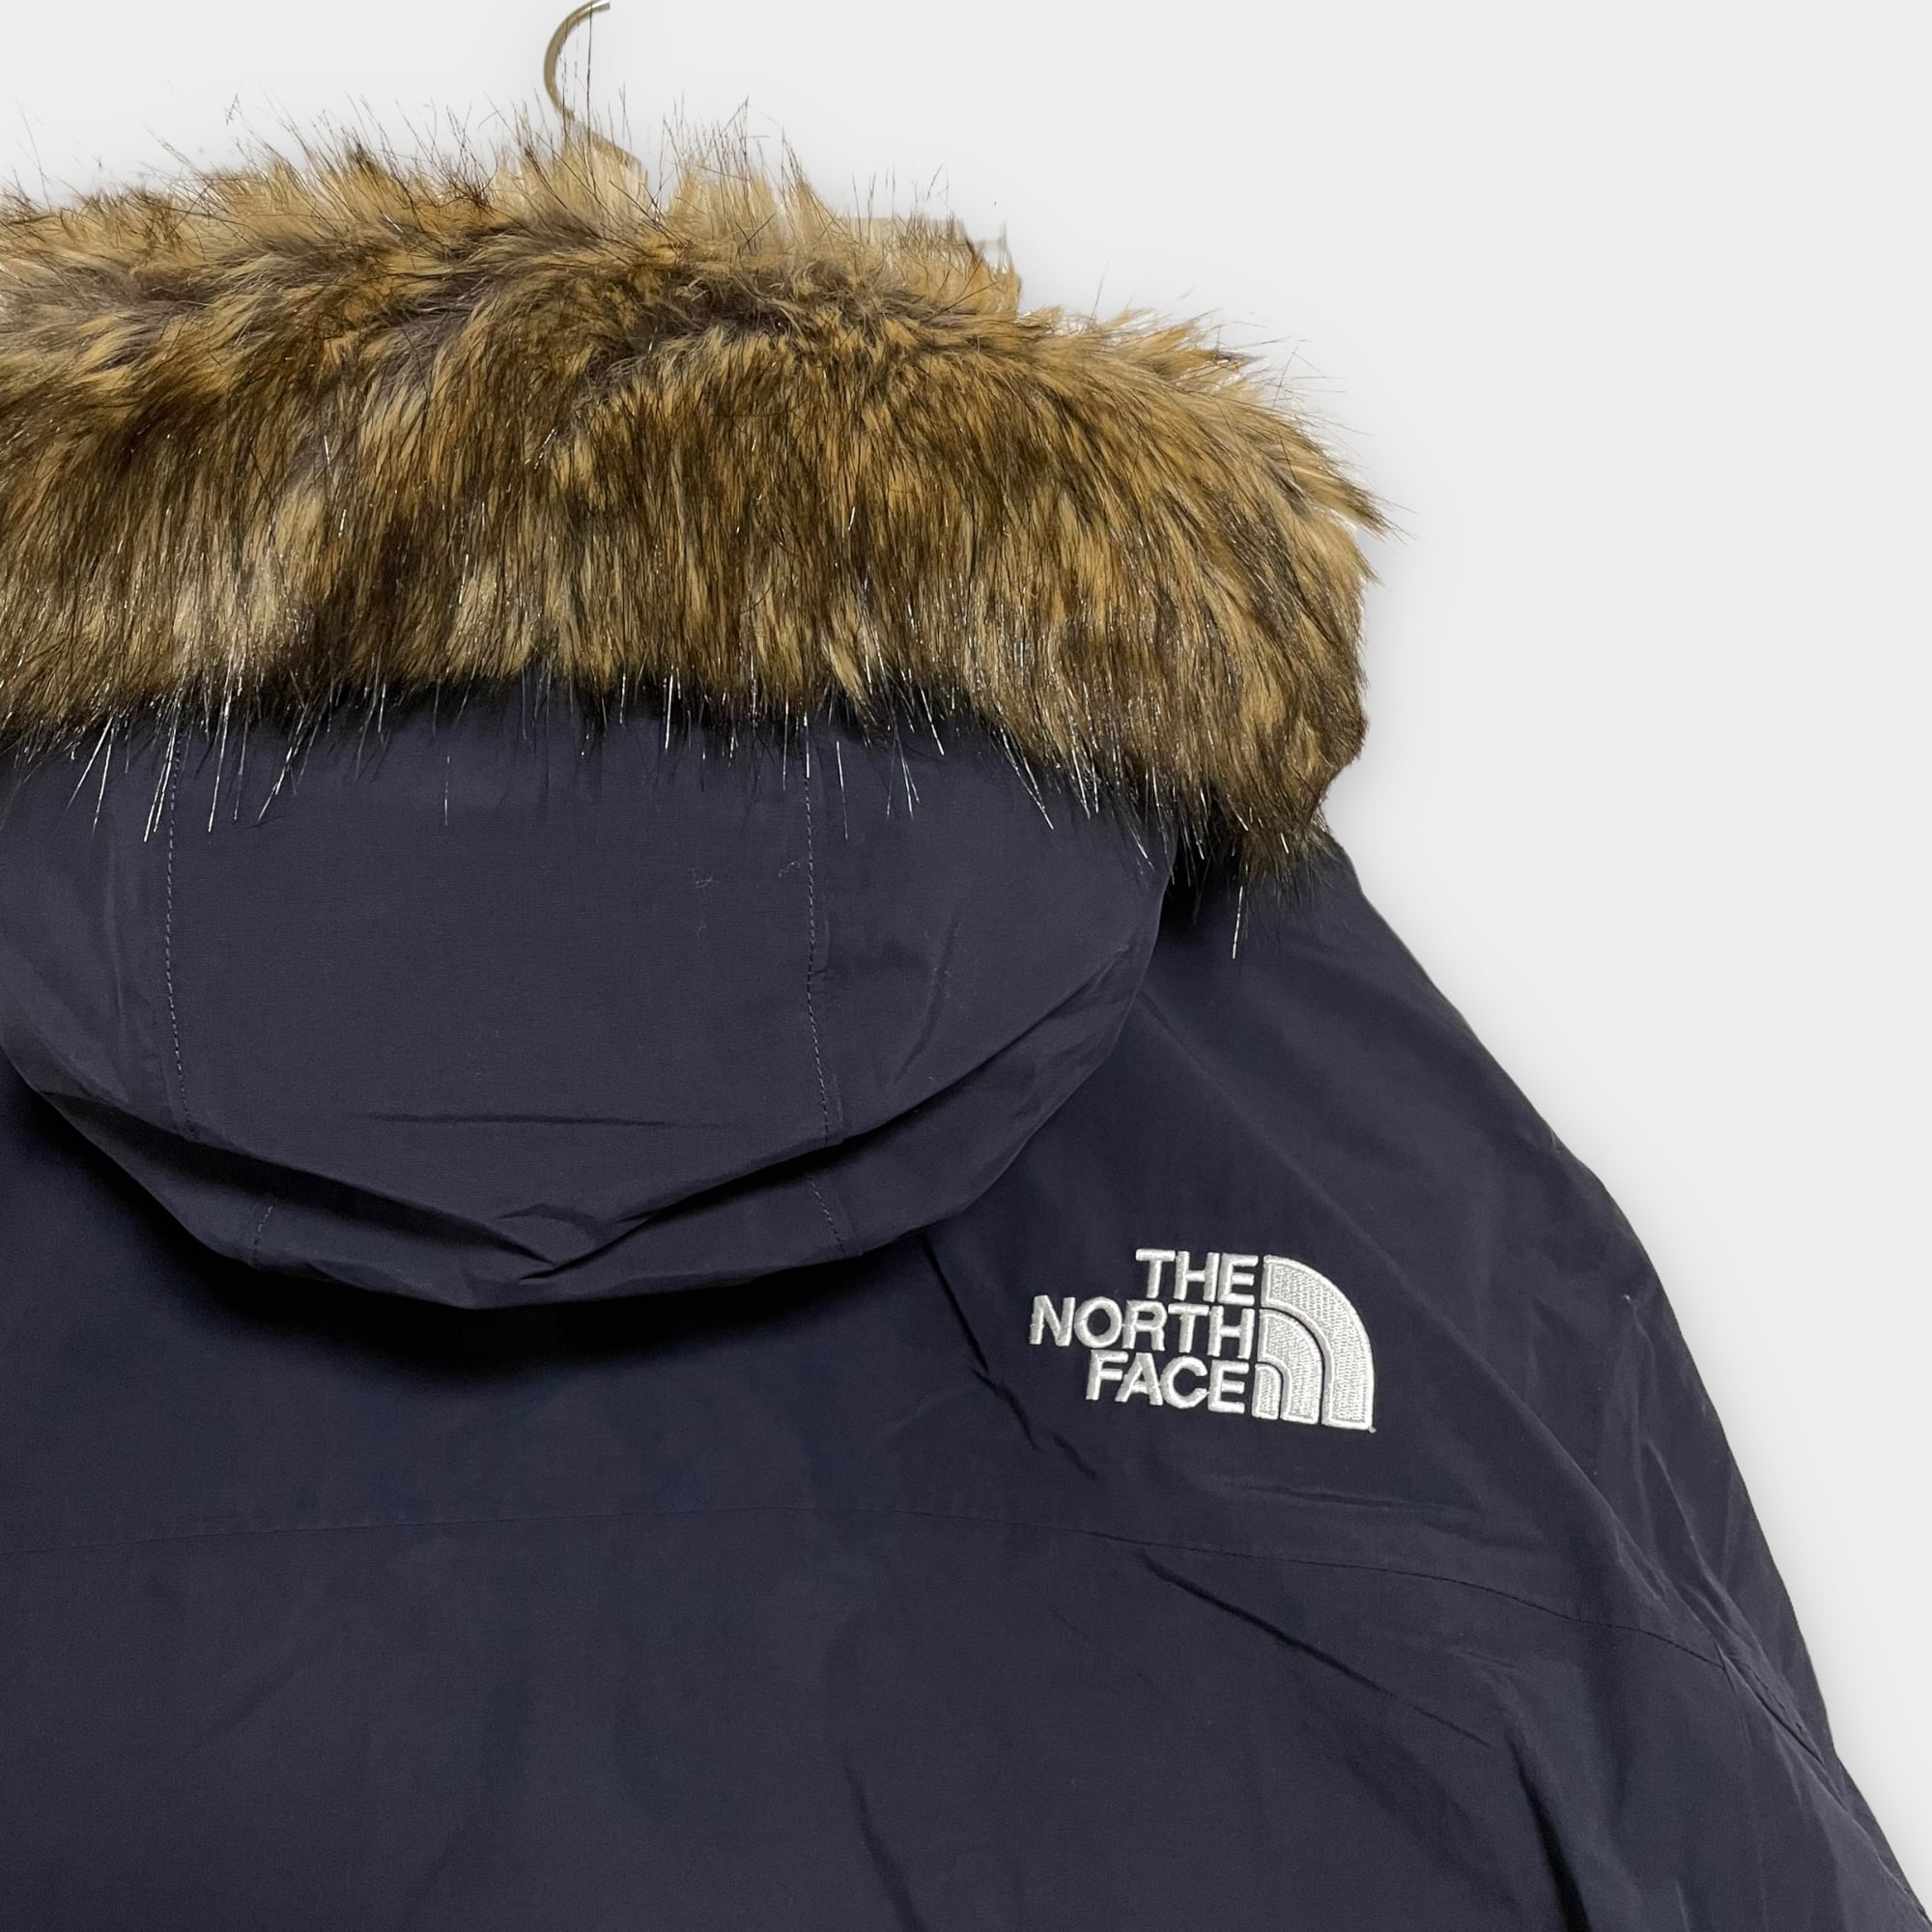 THE NORTH FACE美品 マクマード ダウンパーカー MCMURDO PARKA